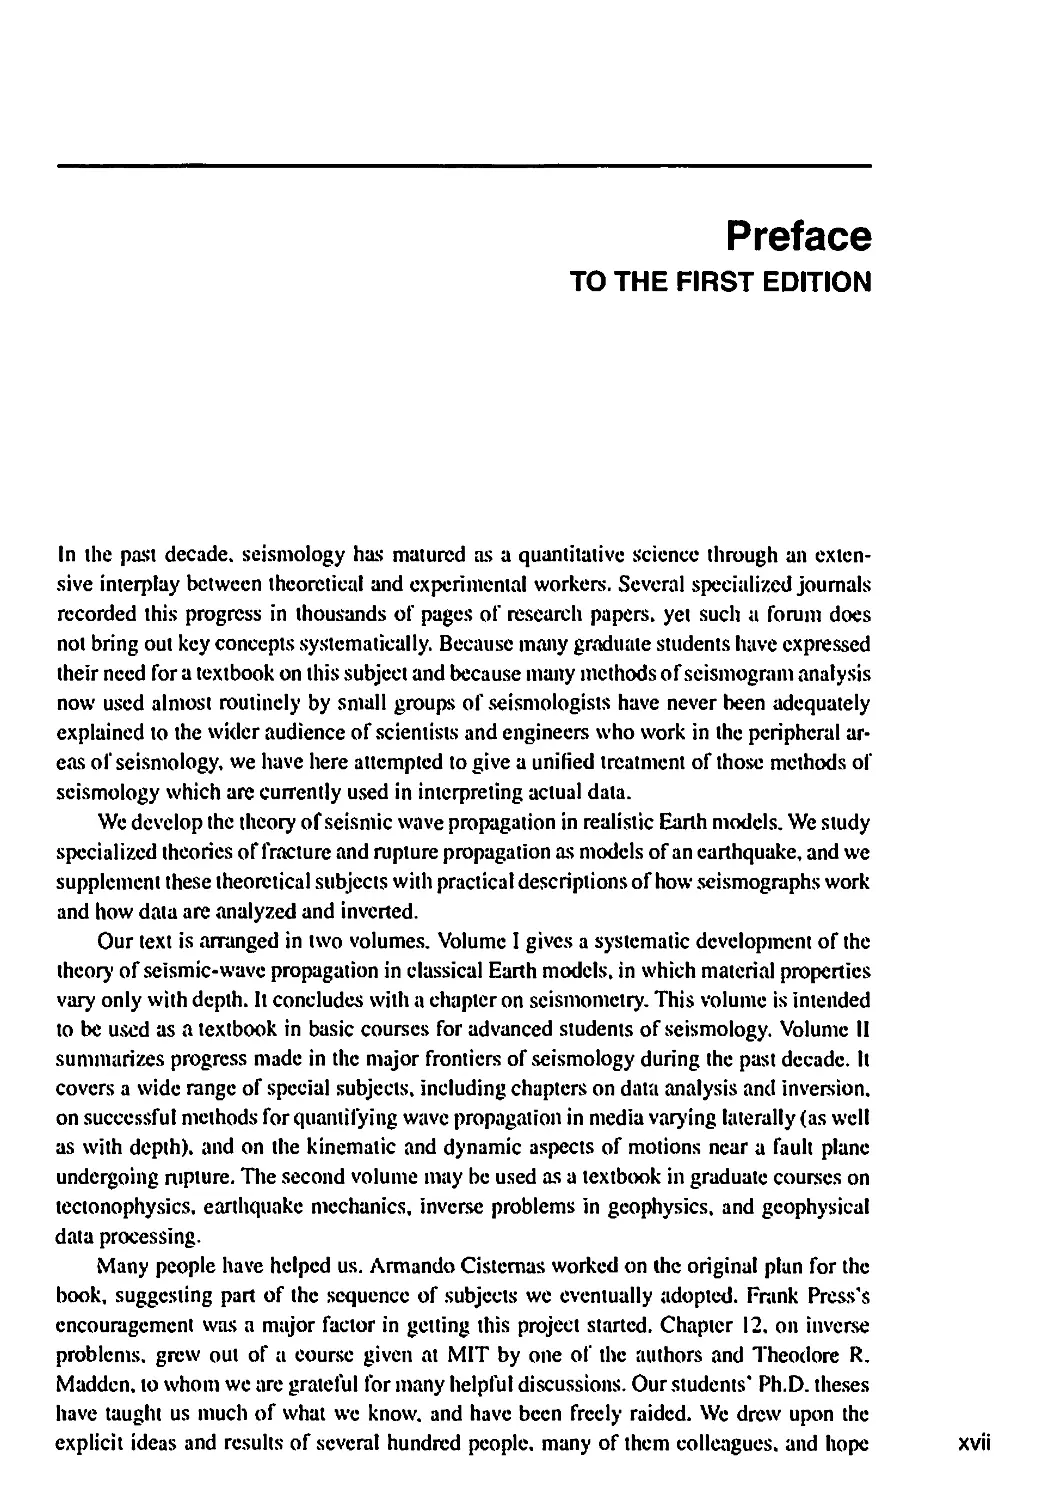 Preface to the First Edition